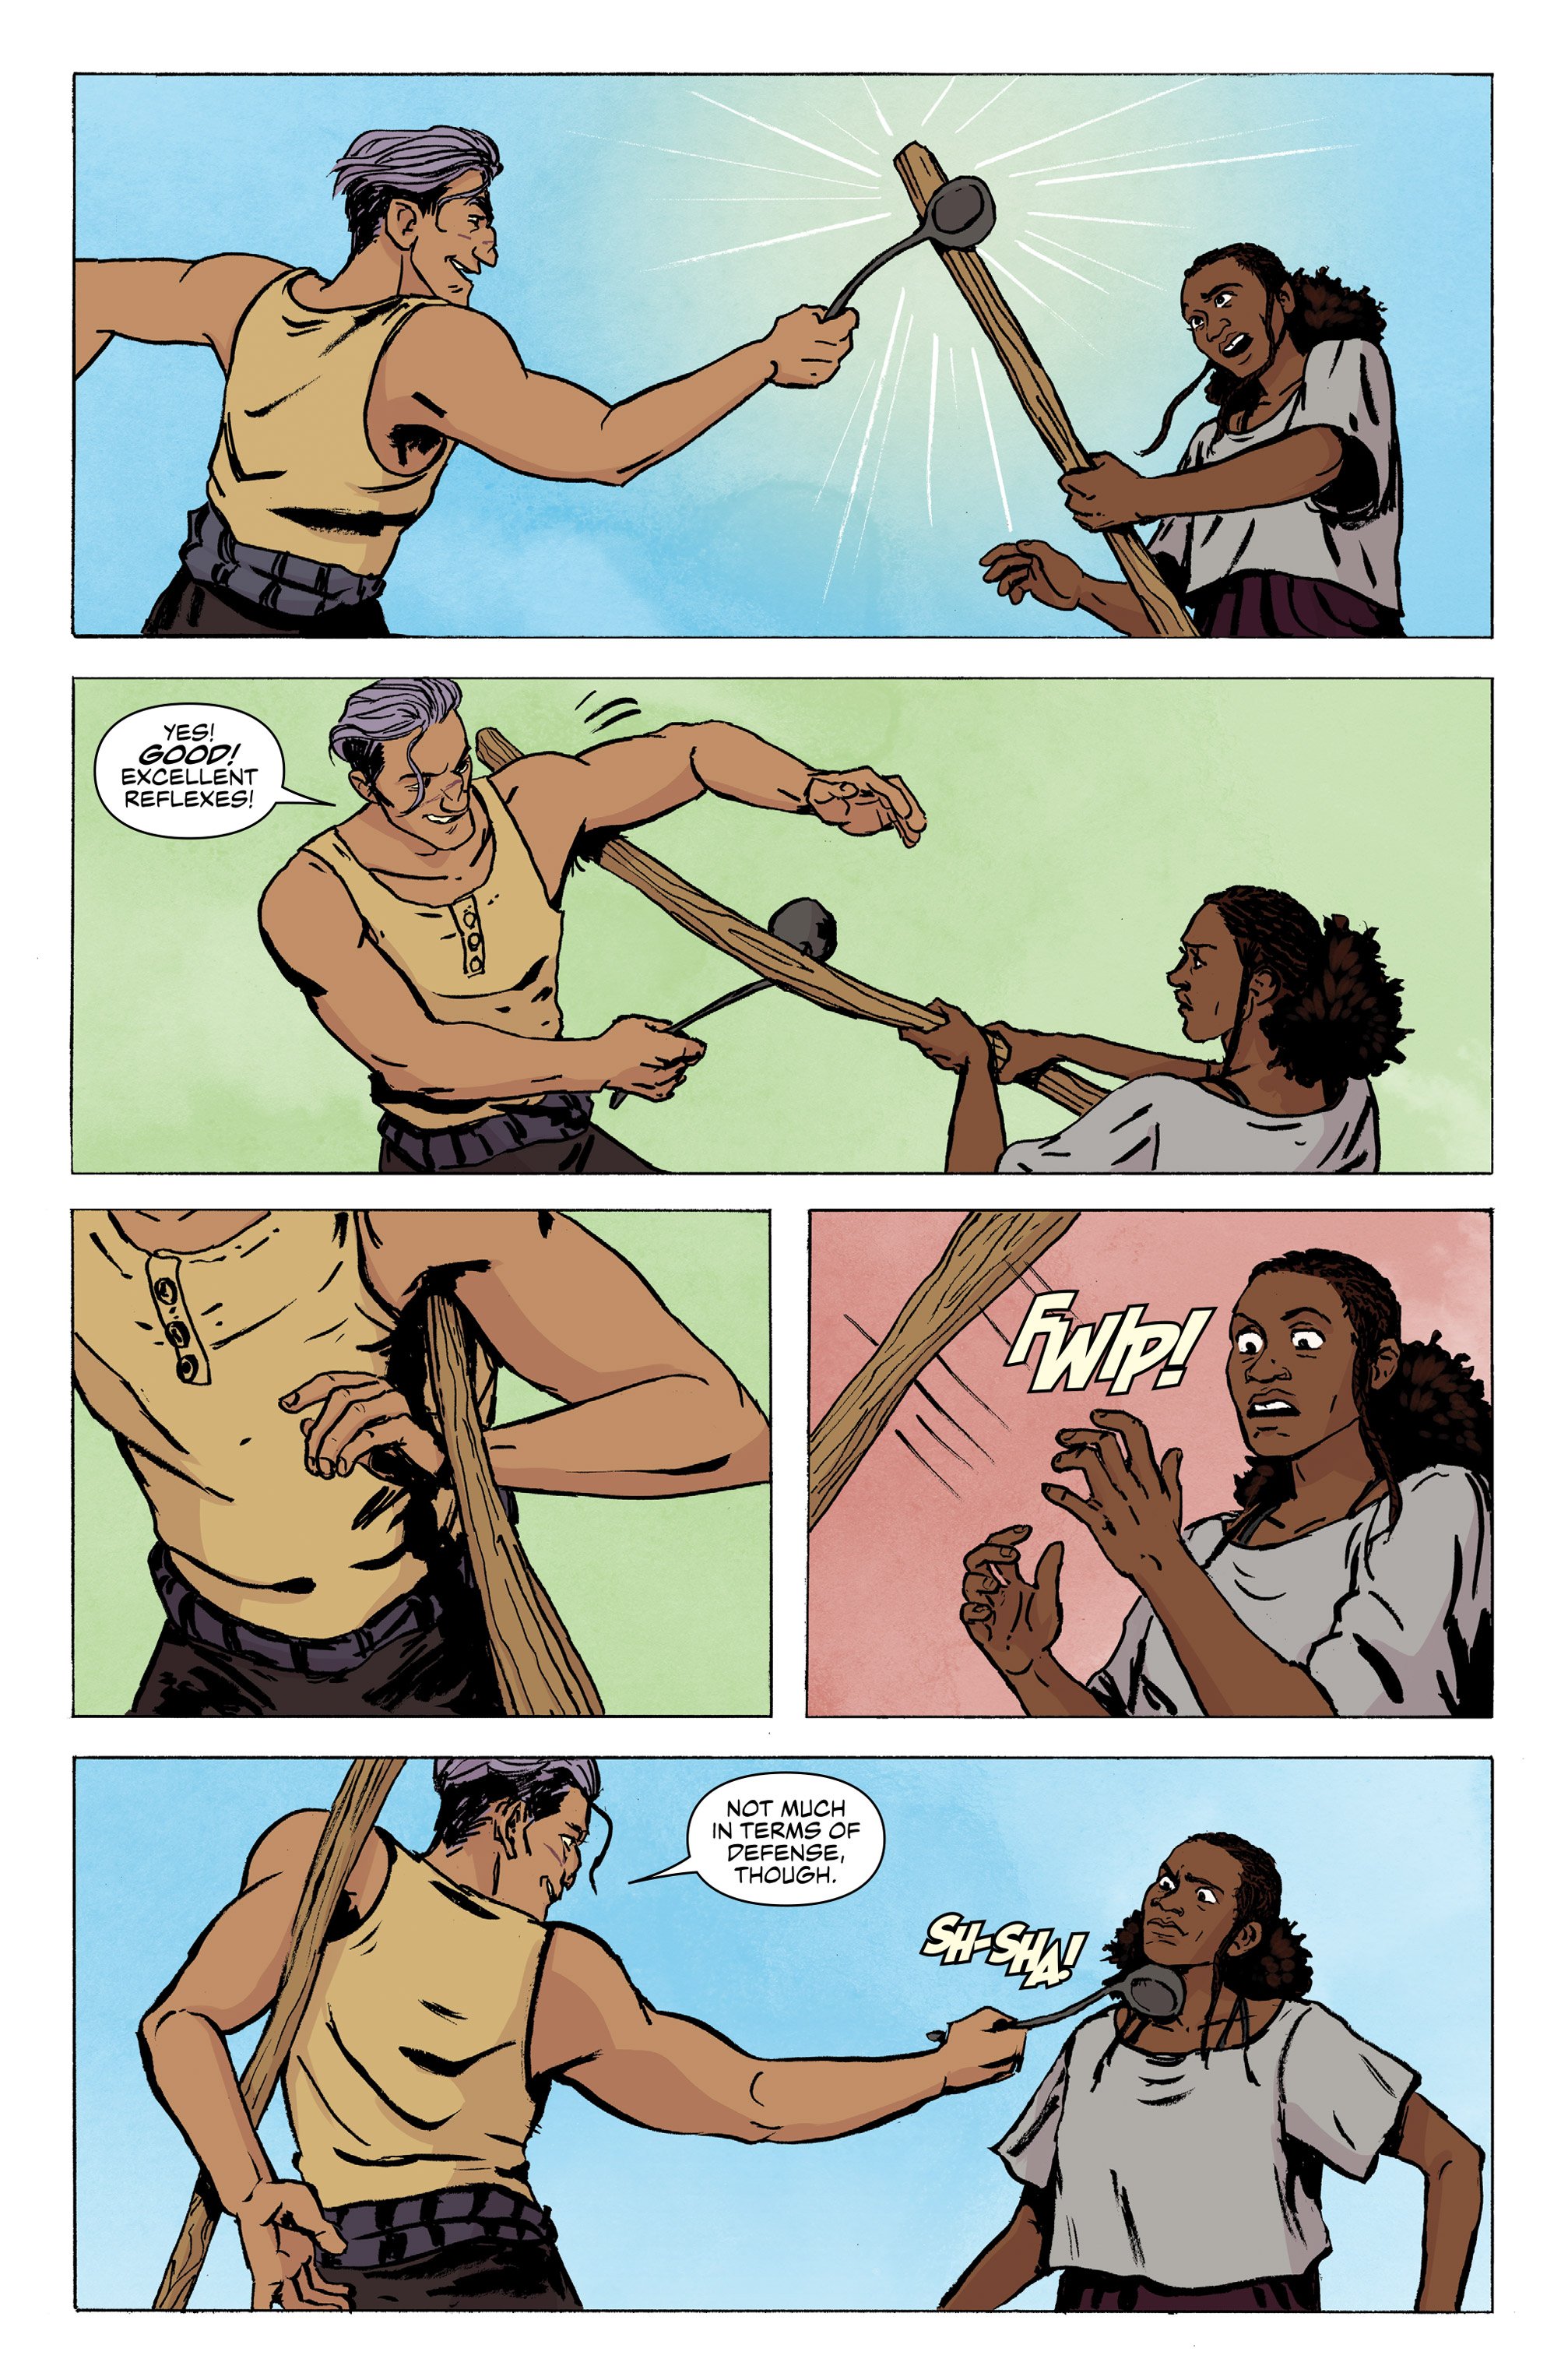 Page 4 of Delver, issue 2.